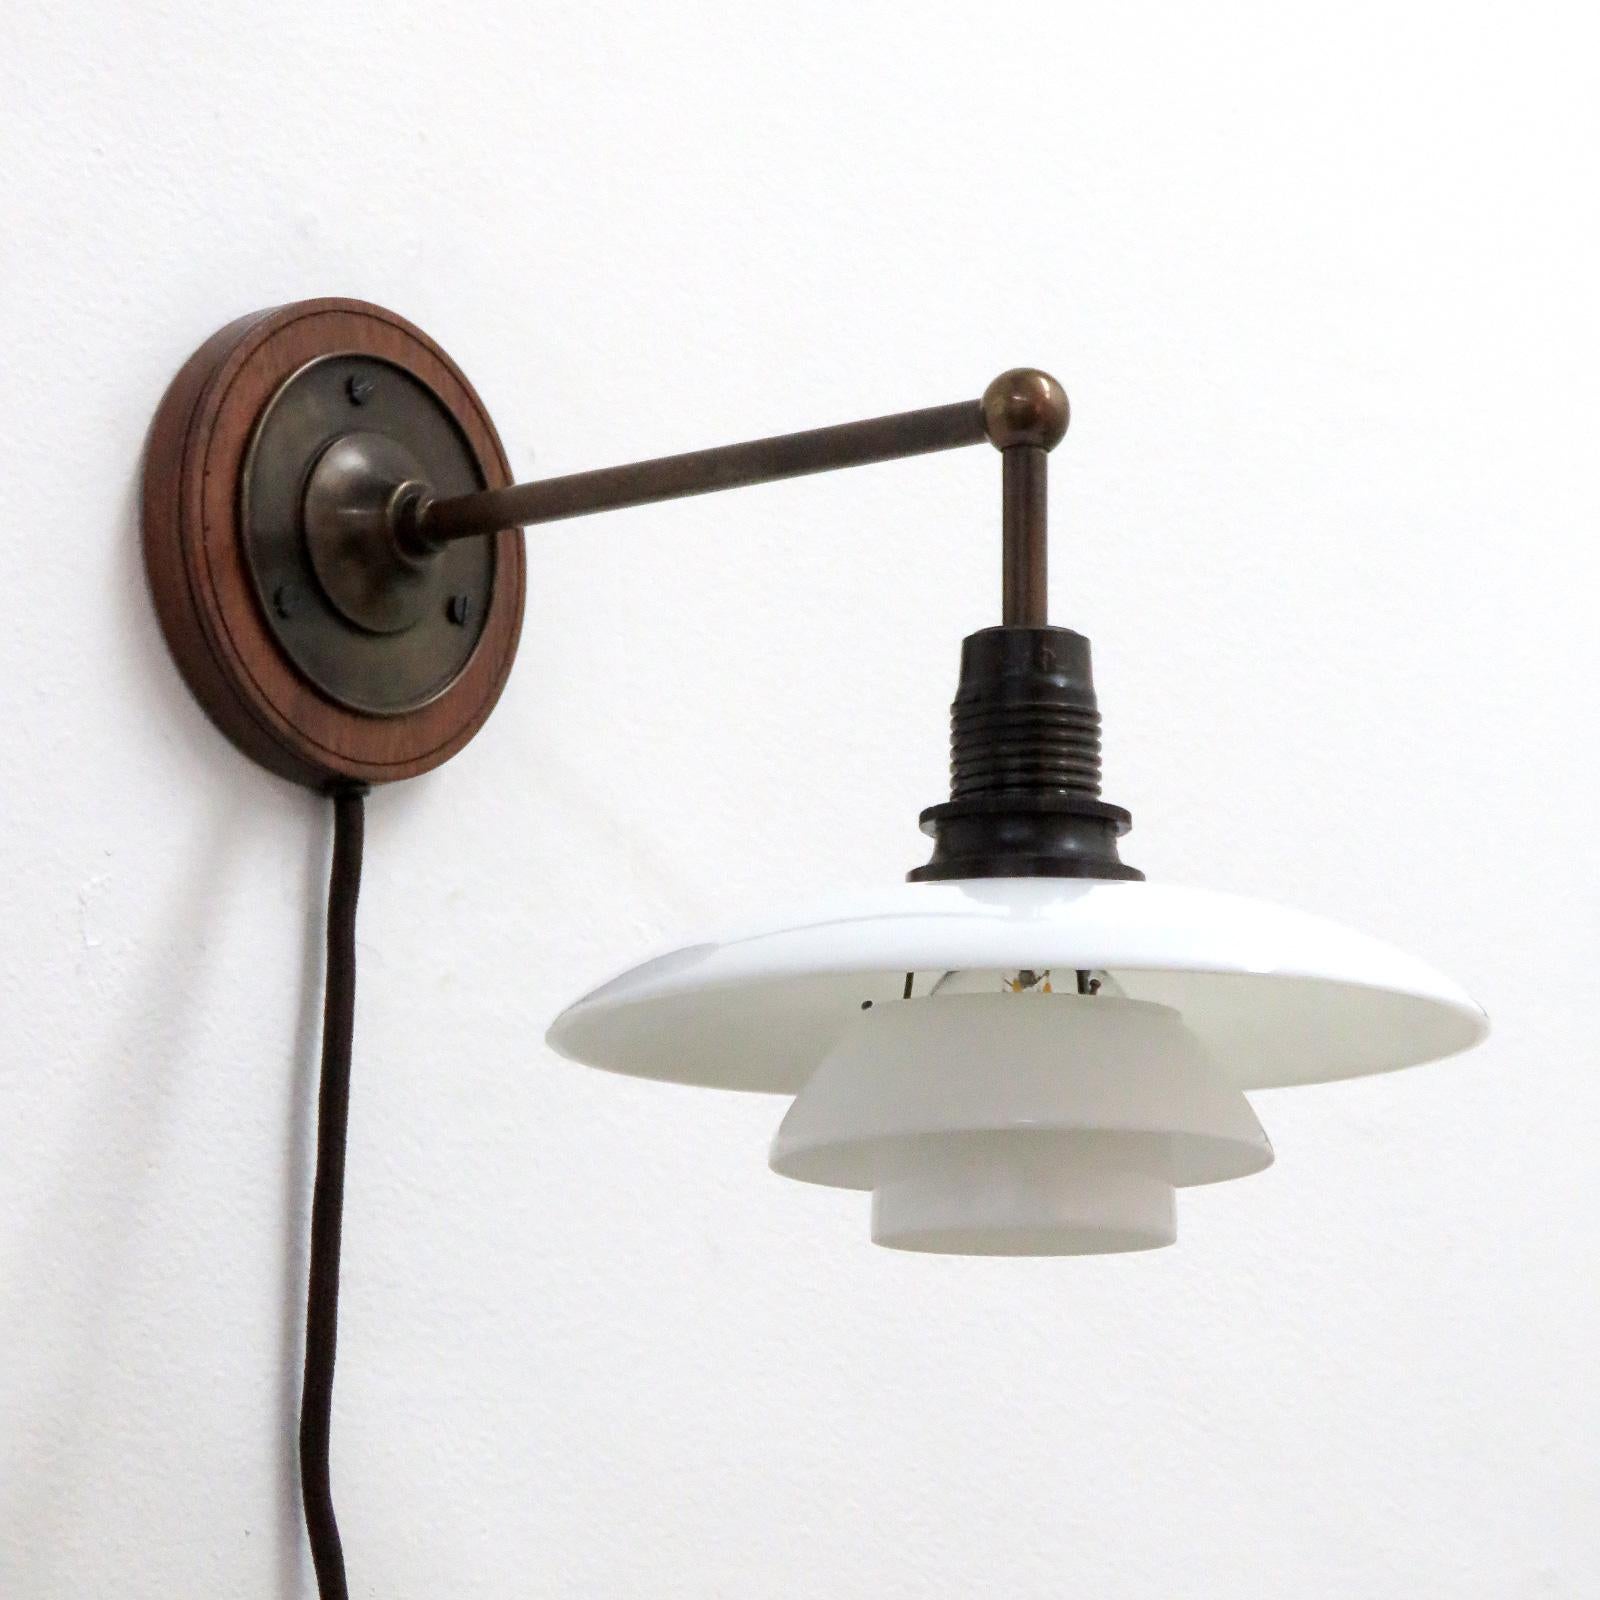 Wonderful PH 2/1 wall lights by Poul Henningsen for Louis Poulsen, 1930, three opaline glass shades and frosted diffuser on a brass arm with oak wall mount, wired as plug-in version with newer cloth wire to match the original, bakelit socket and